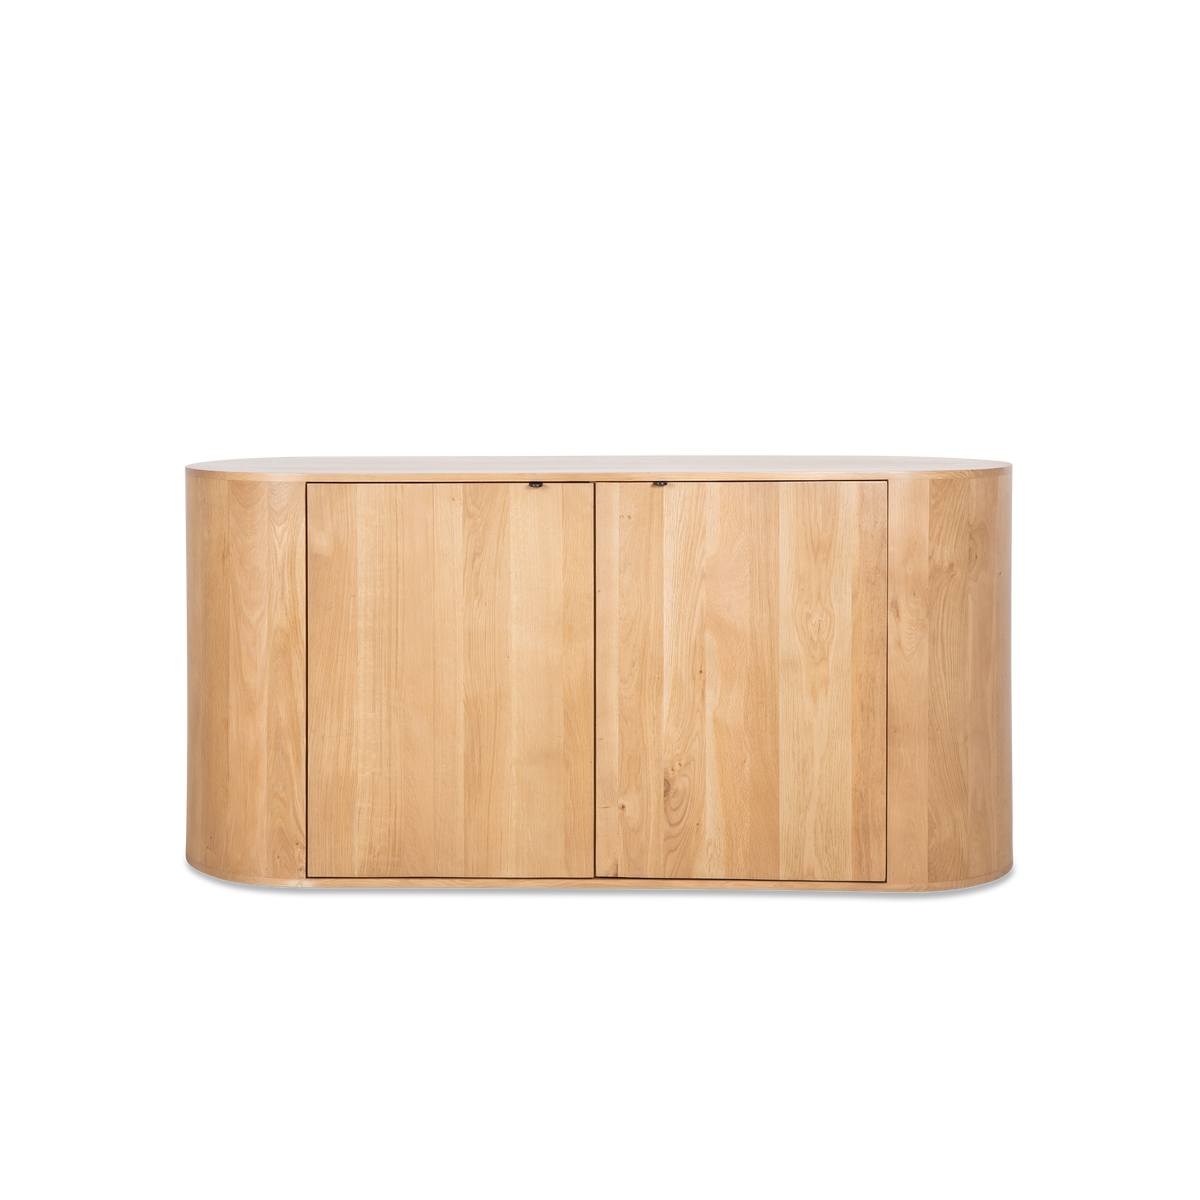 Highlighting the raw beauty of nature, the Milos Sideboard offers a natural look with its minimalist cylindrical design.